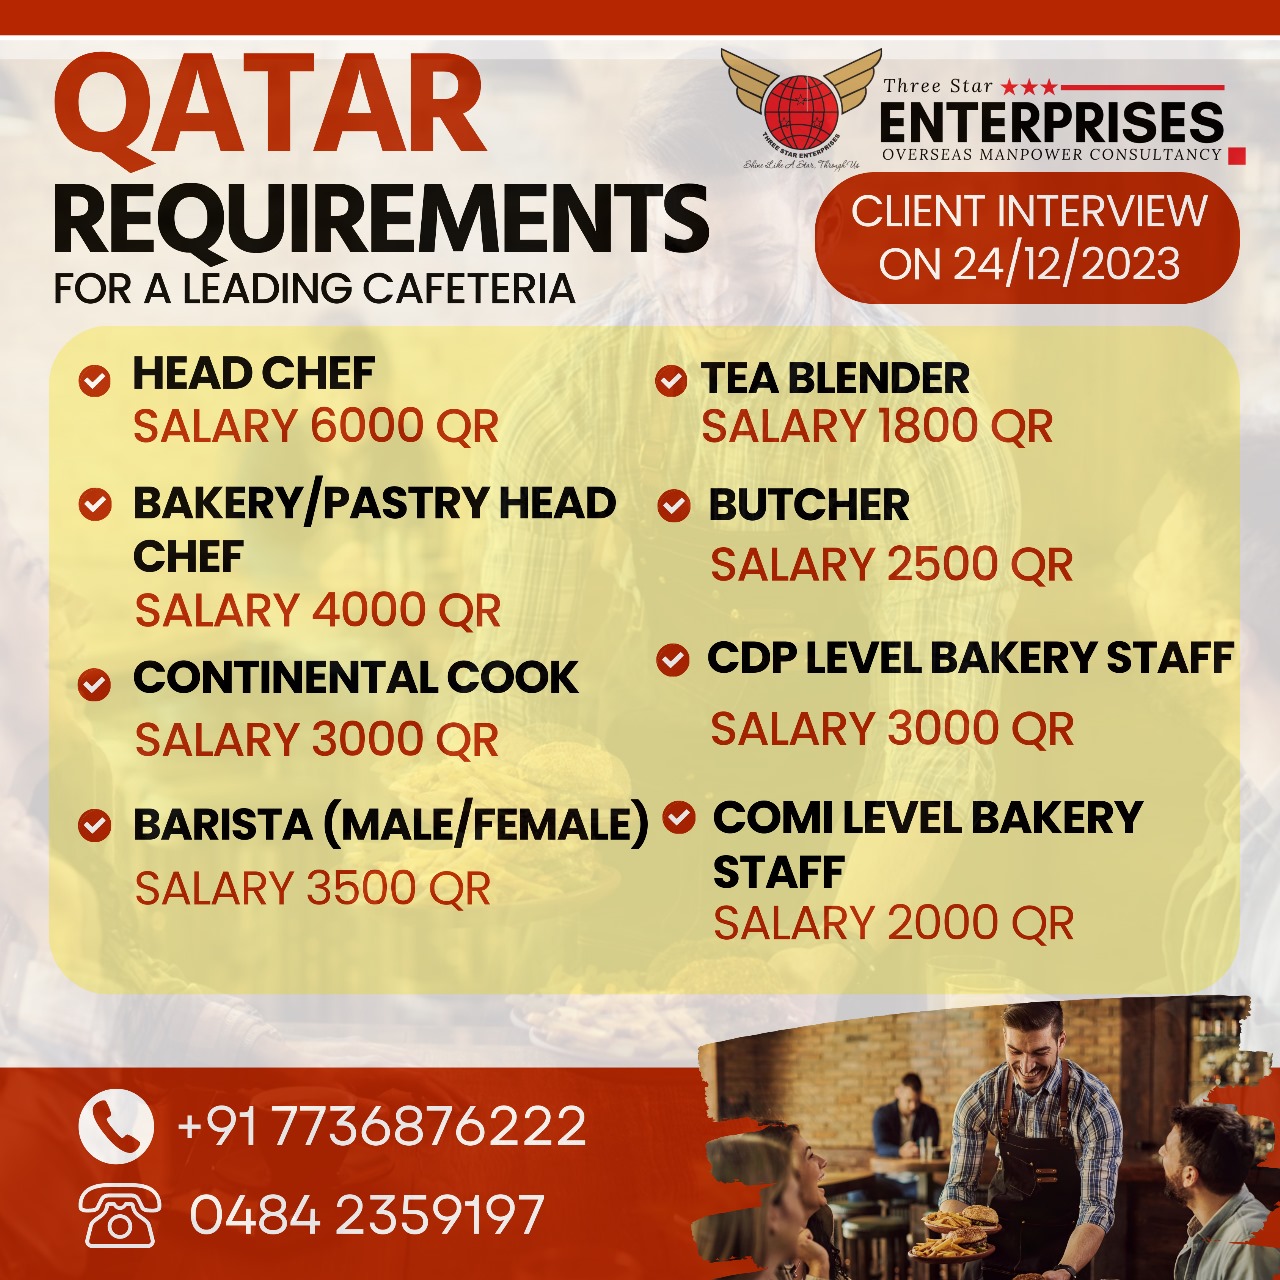 Qatar / India - Job Requirements for a Leading Cafeteria - SaudiGulf Jobs